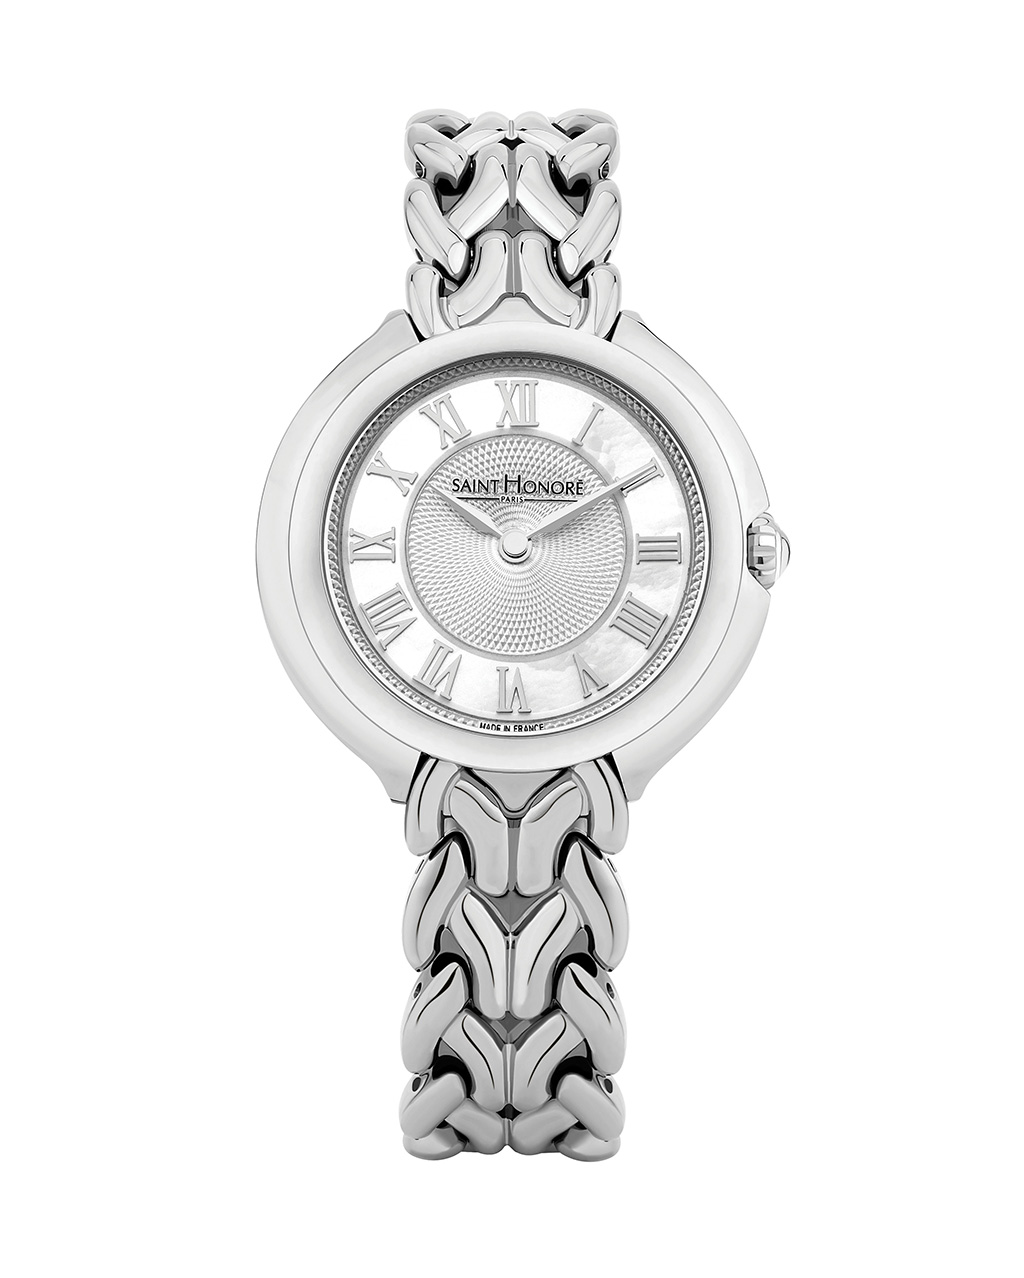 DIVINE Women's watch - stainless steel, white dial, stainless steel strap